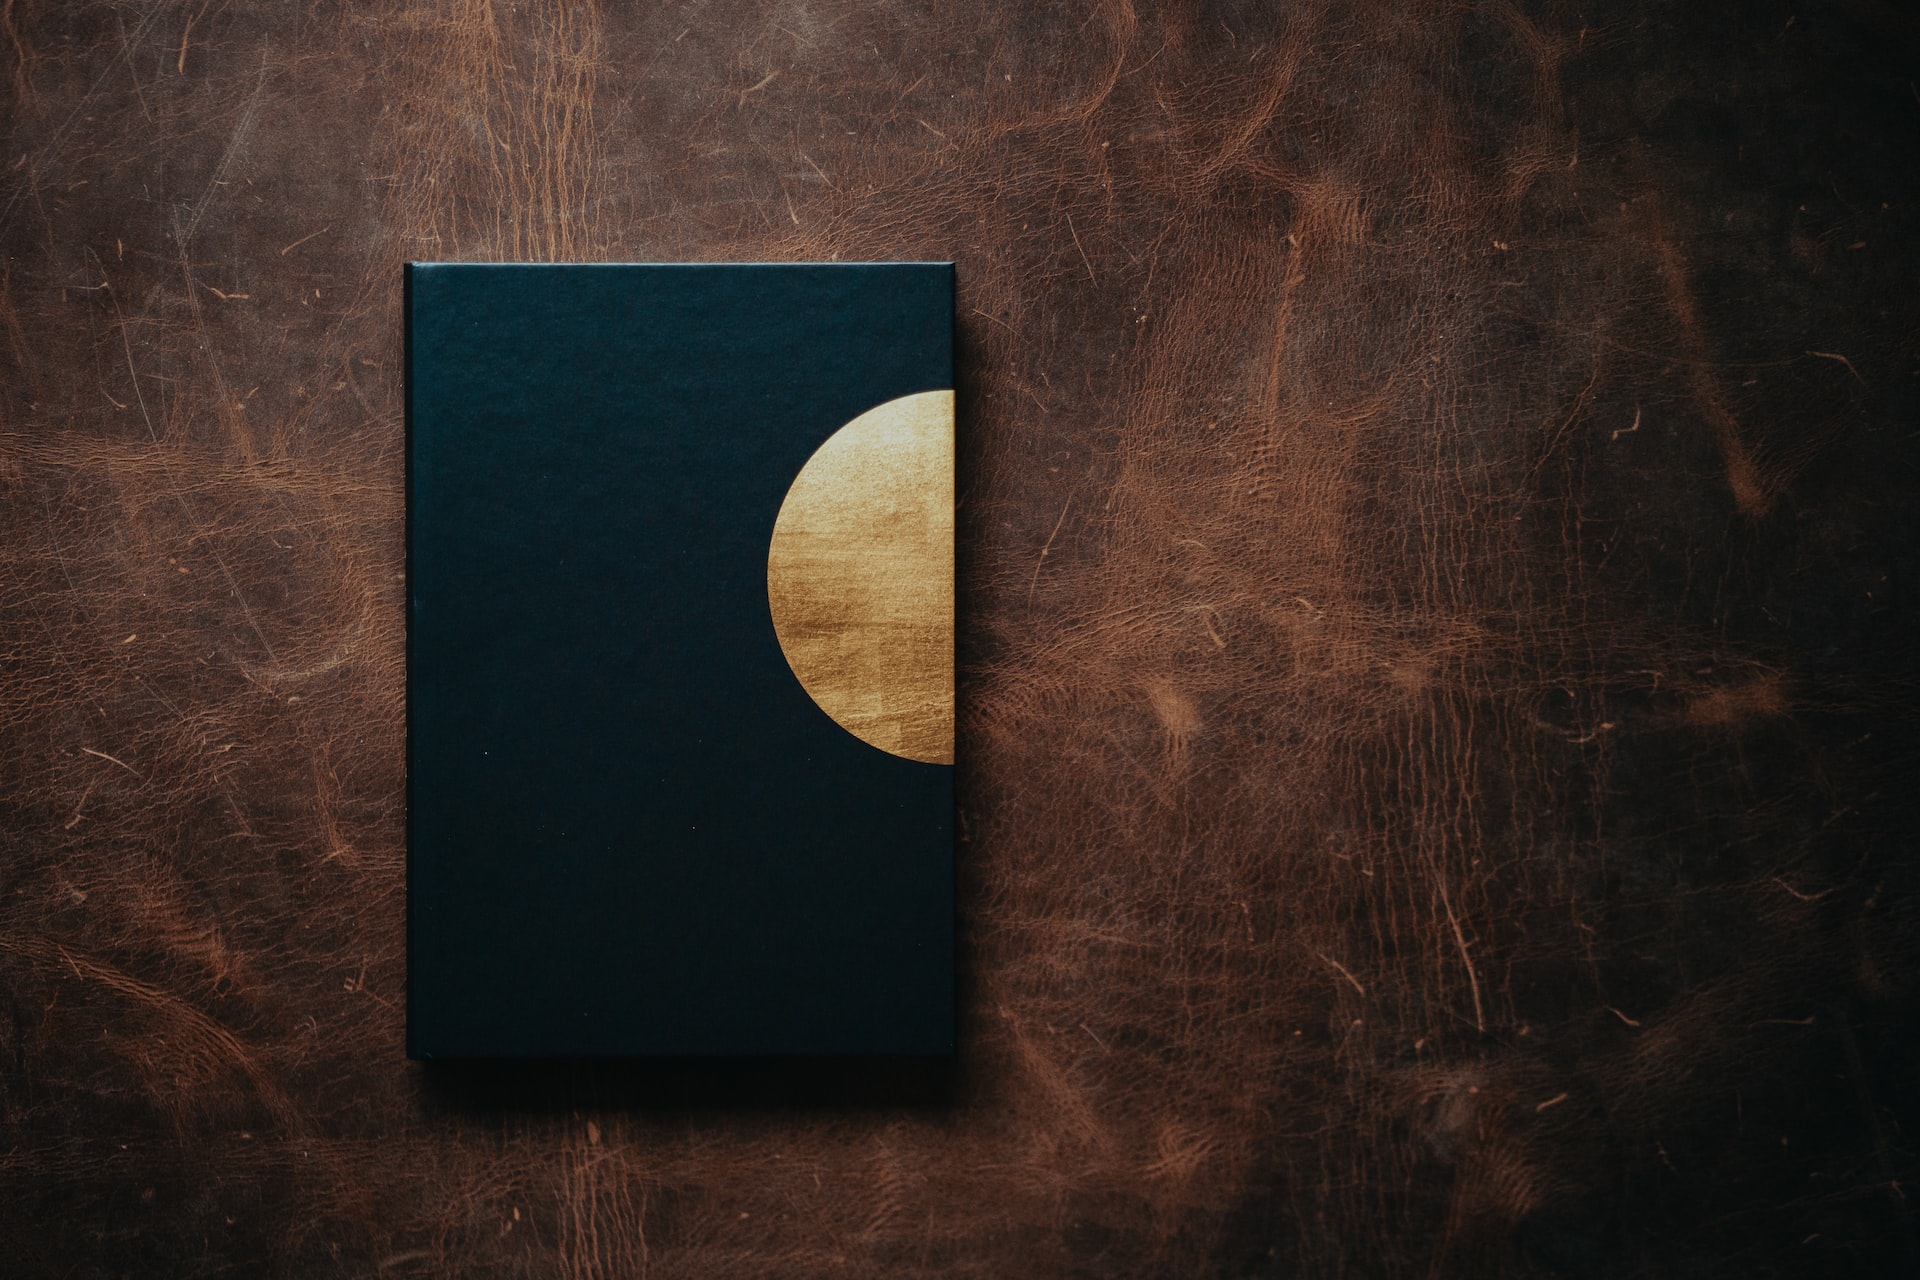 Photo of a black journal with a gold half moon on the cover against a worn brown leather background